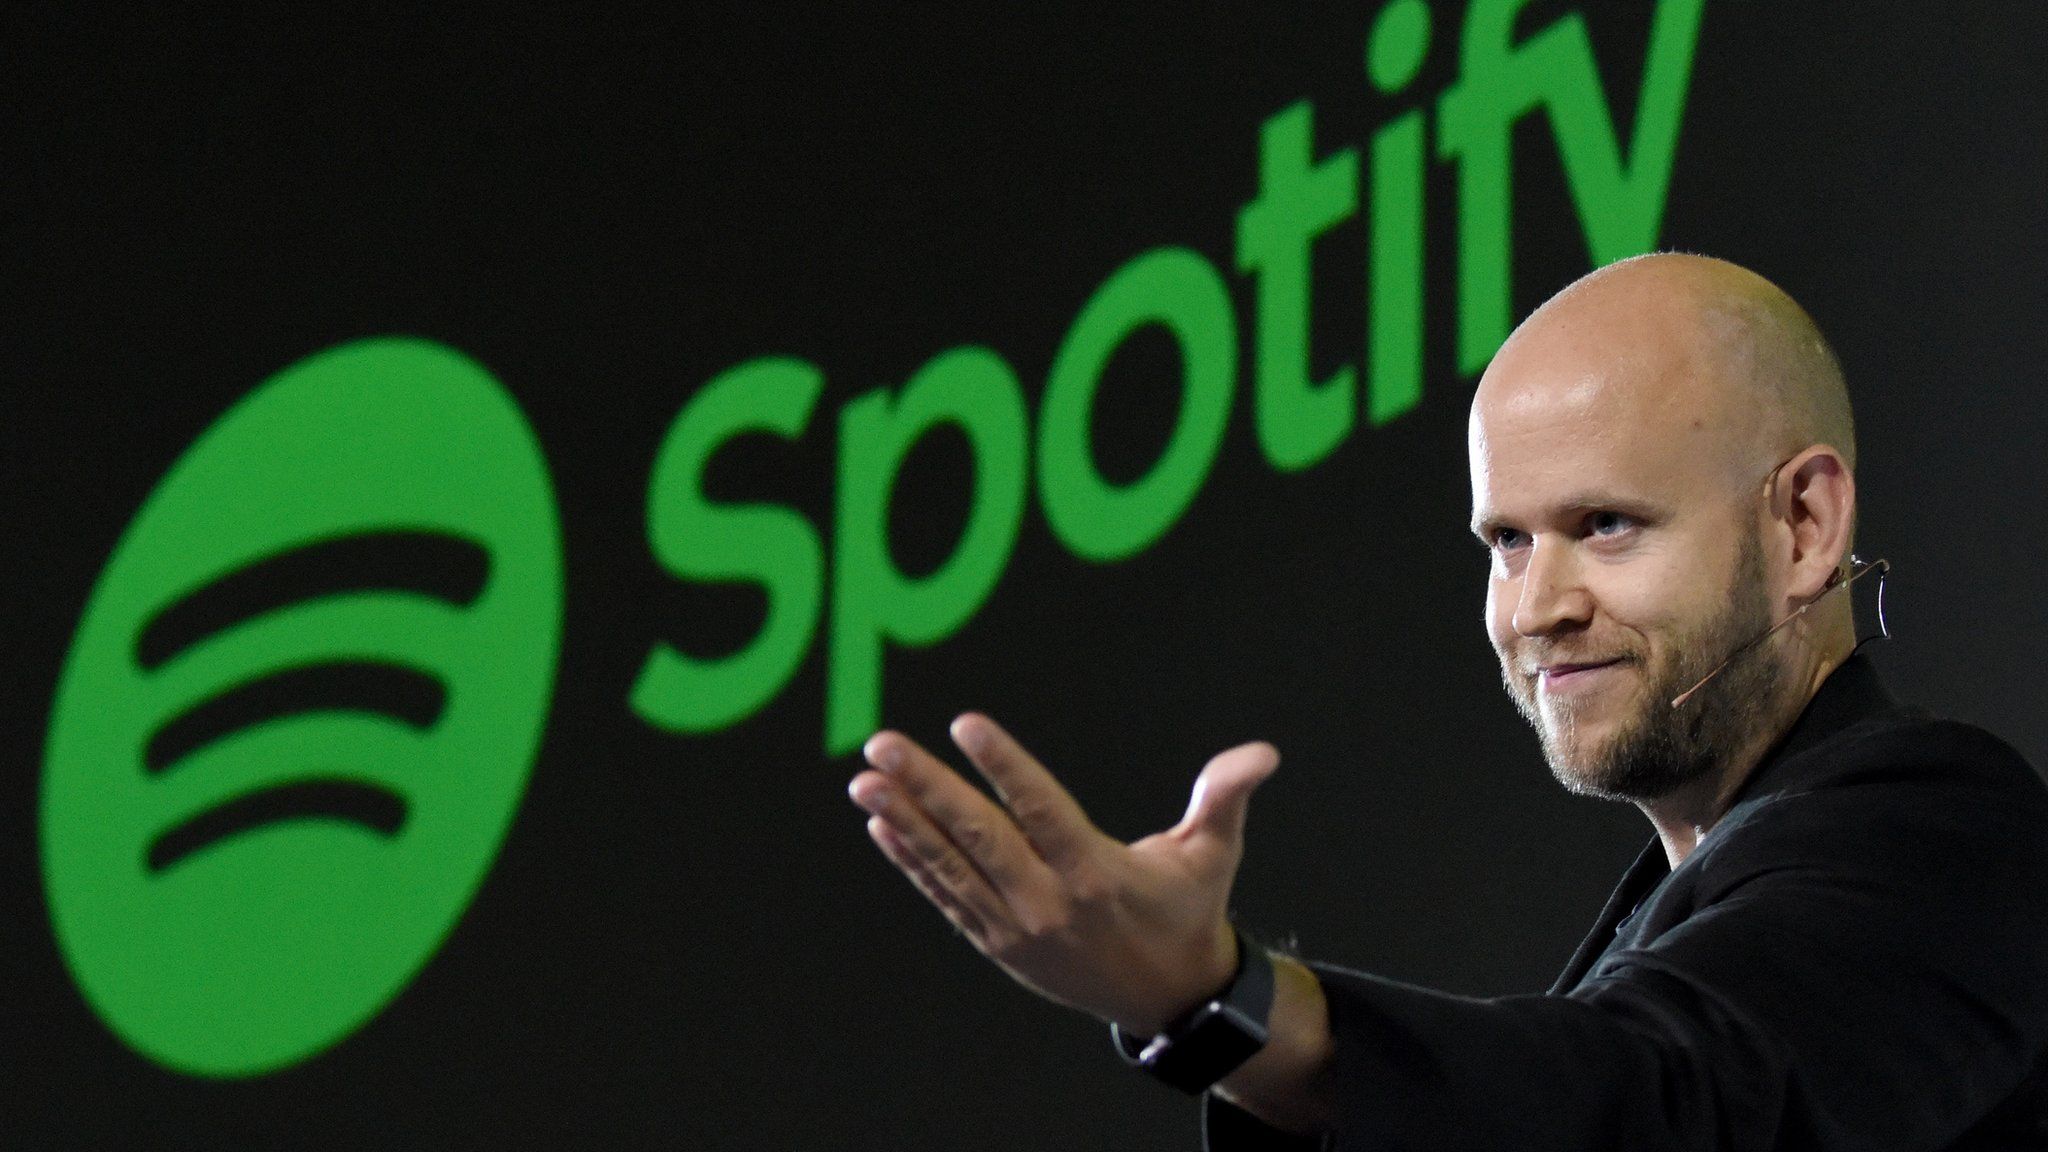 Where Was The Popular Music Streaming Service Spotify Founded?